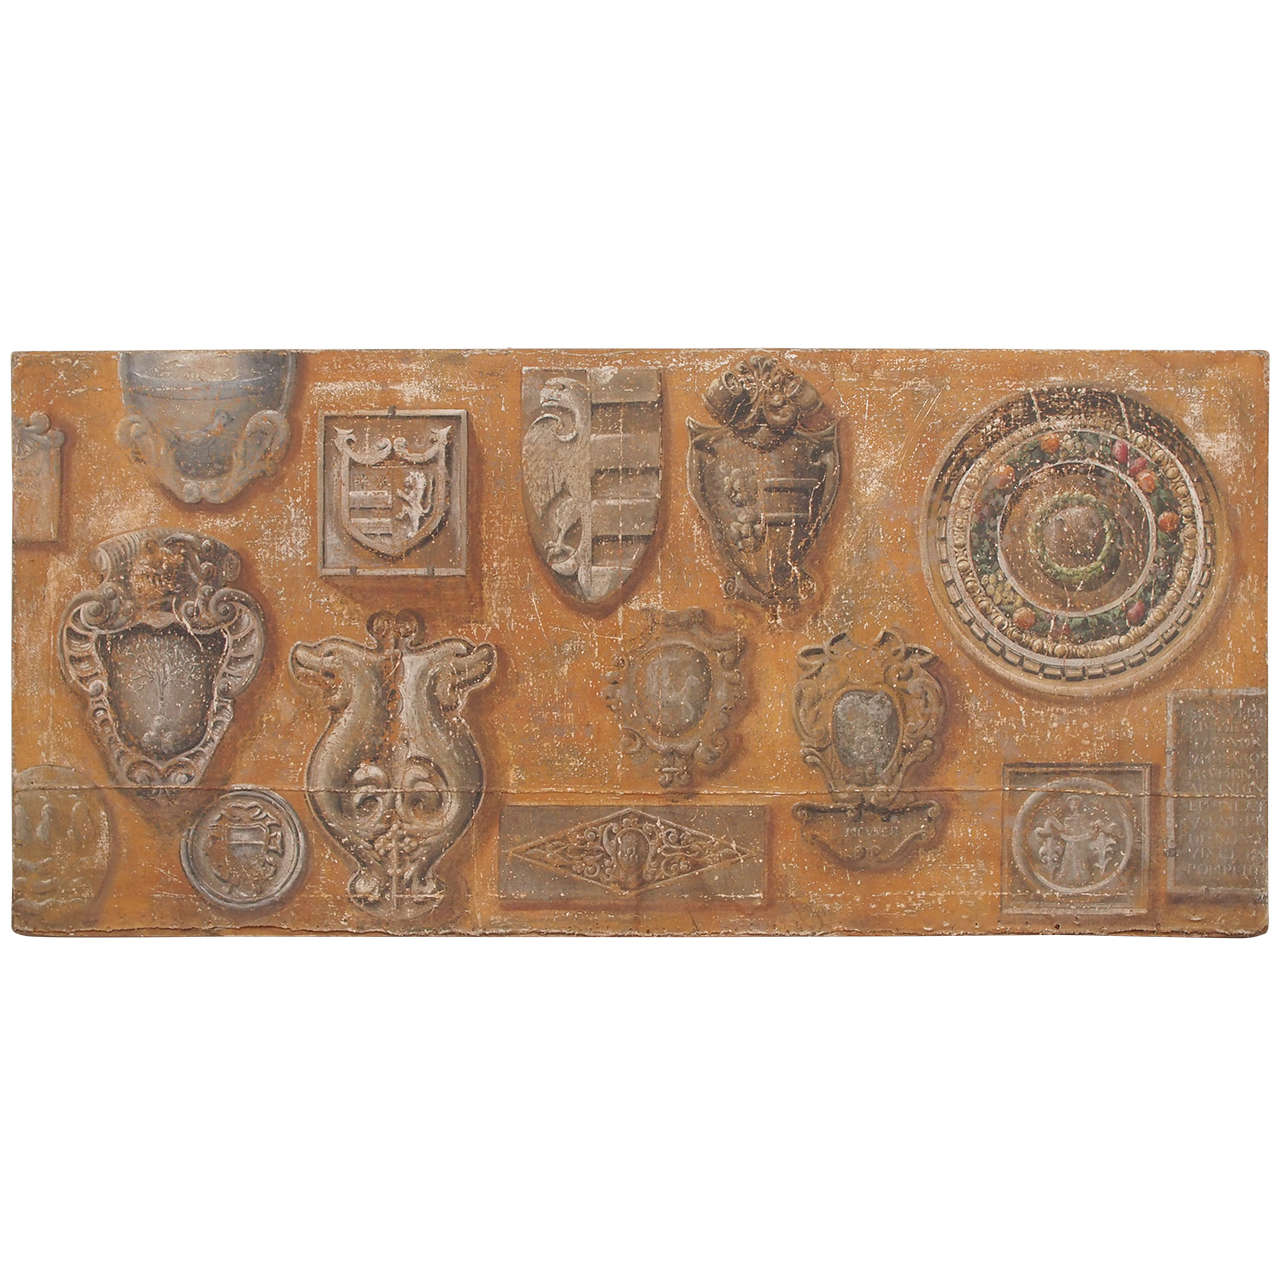 Large Antique Painting of a Mounted Collection of Stone Fragments and Emblems